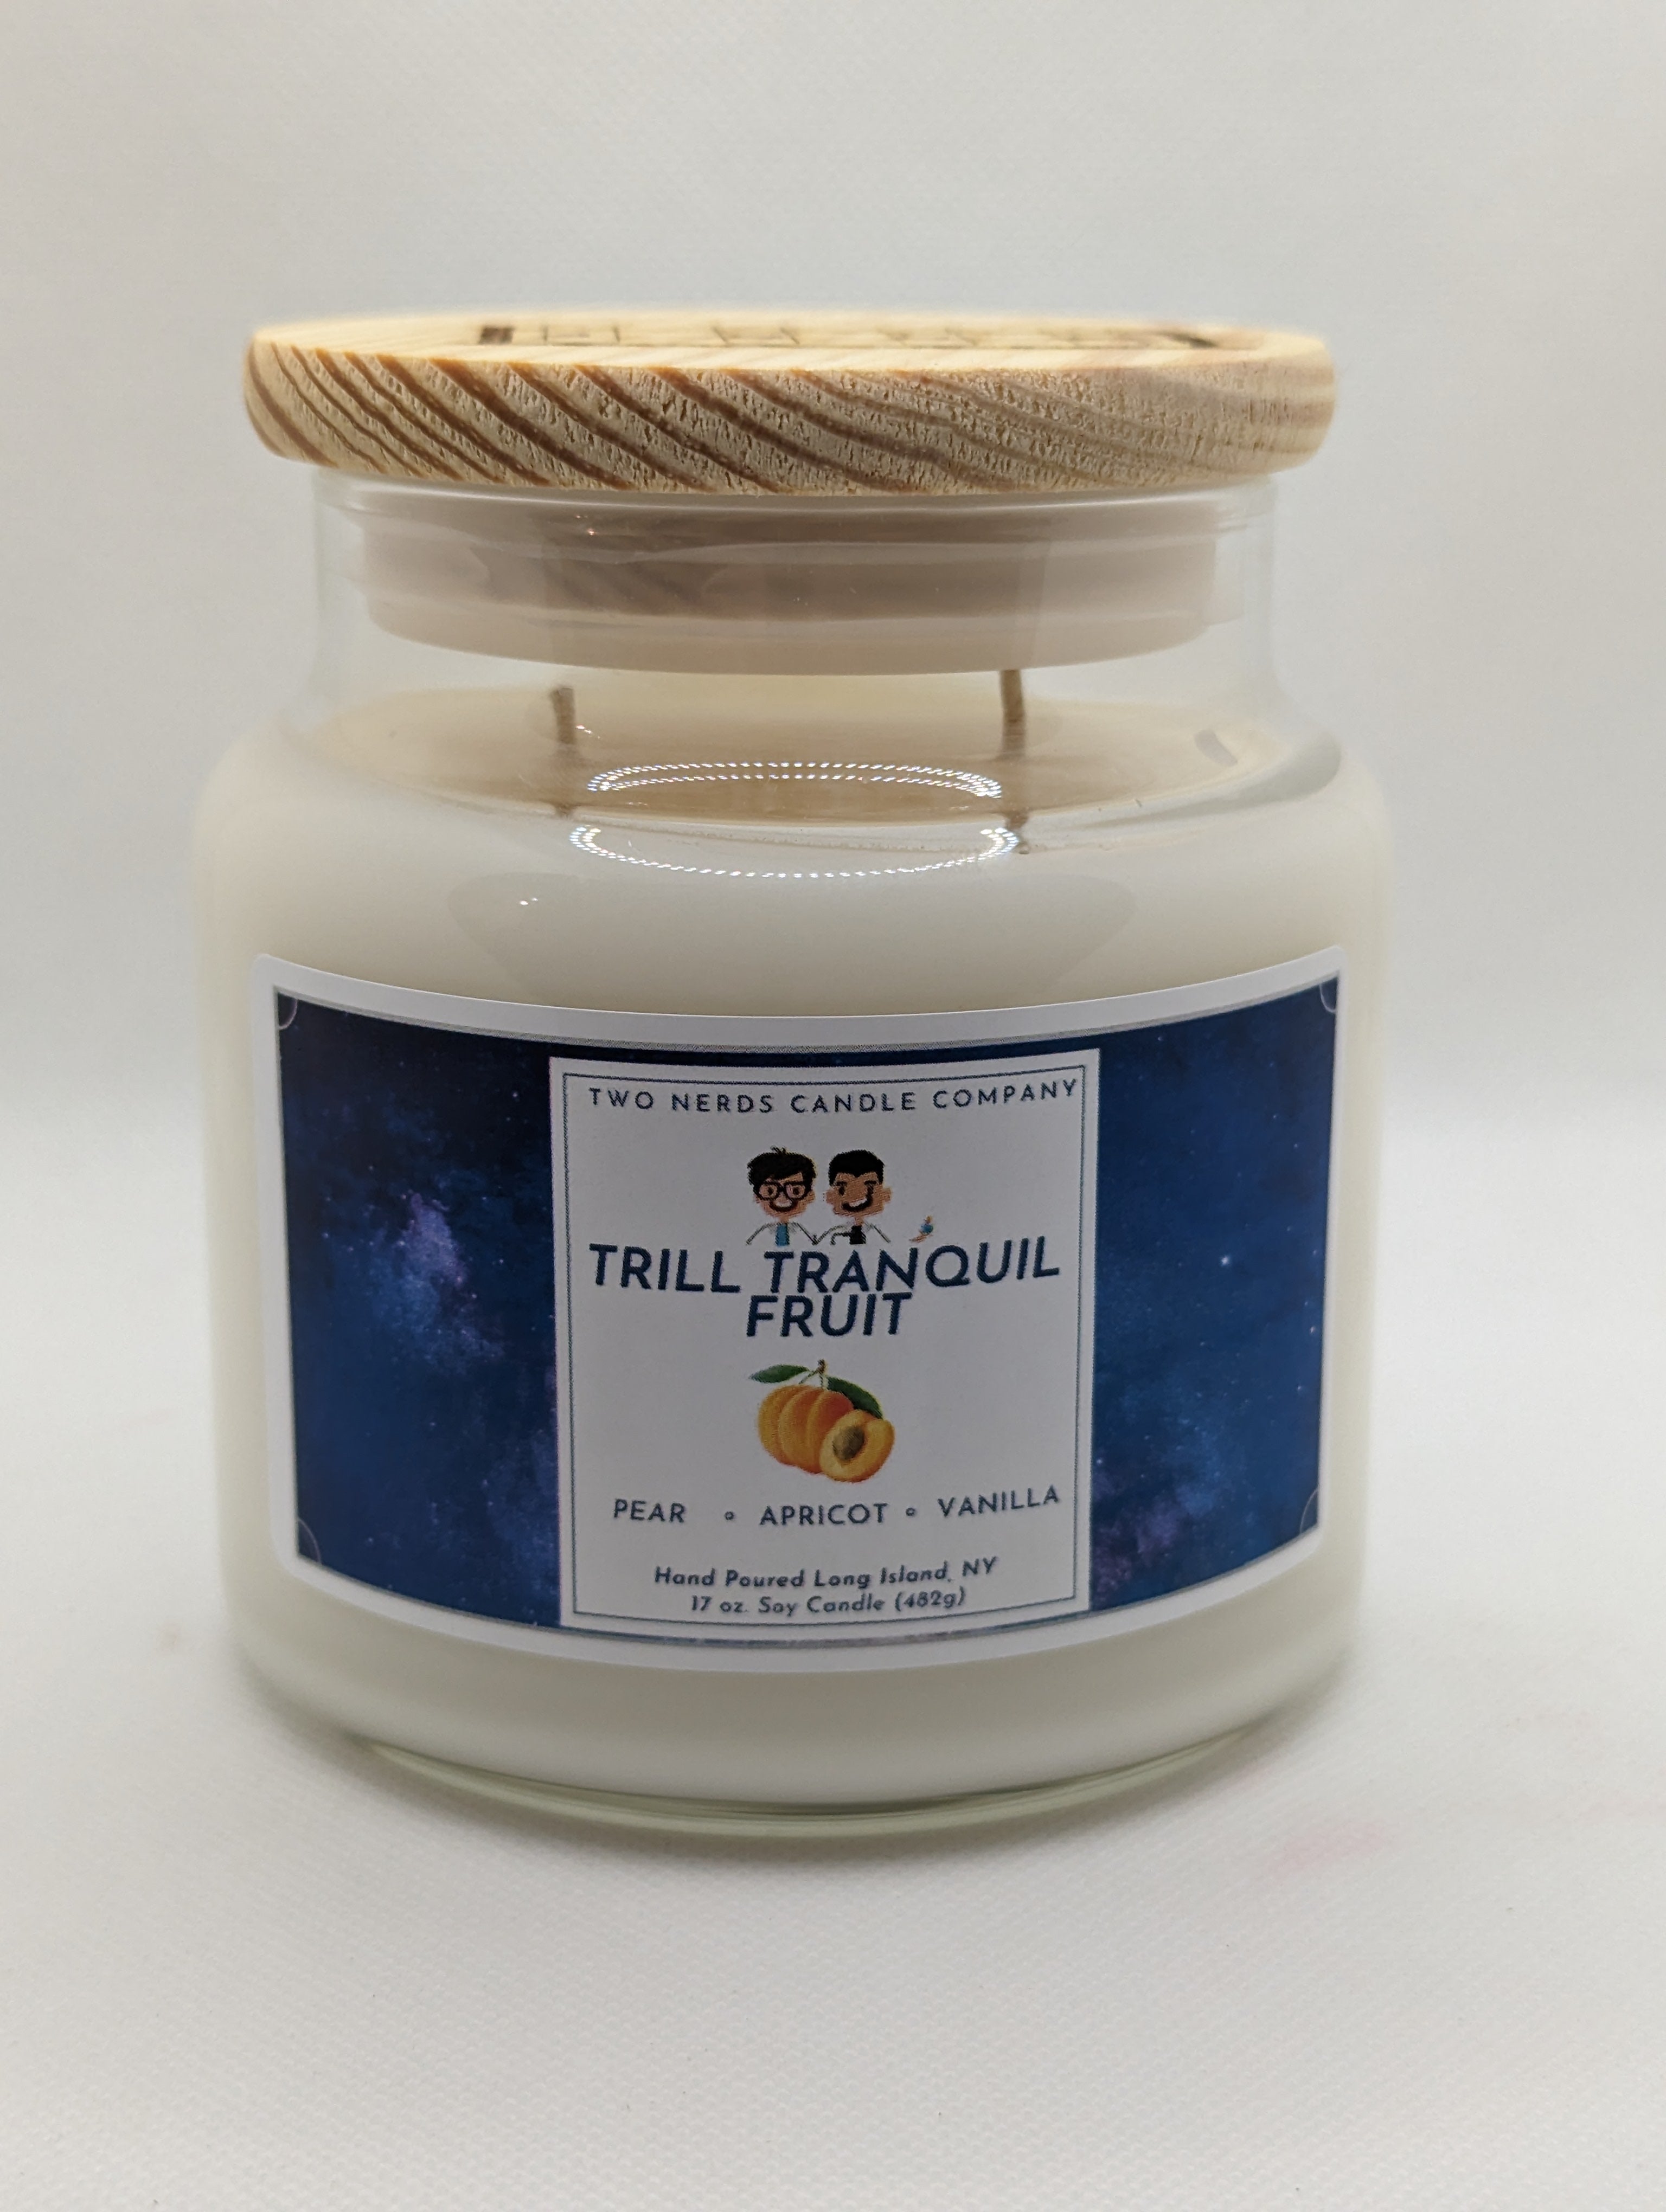 Trill Tranquil Fruit